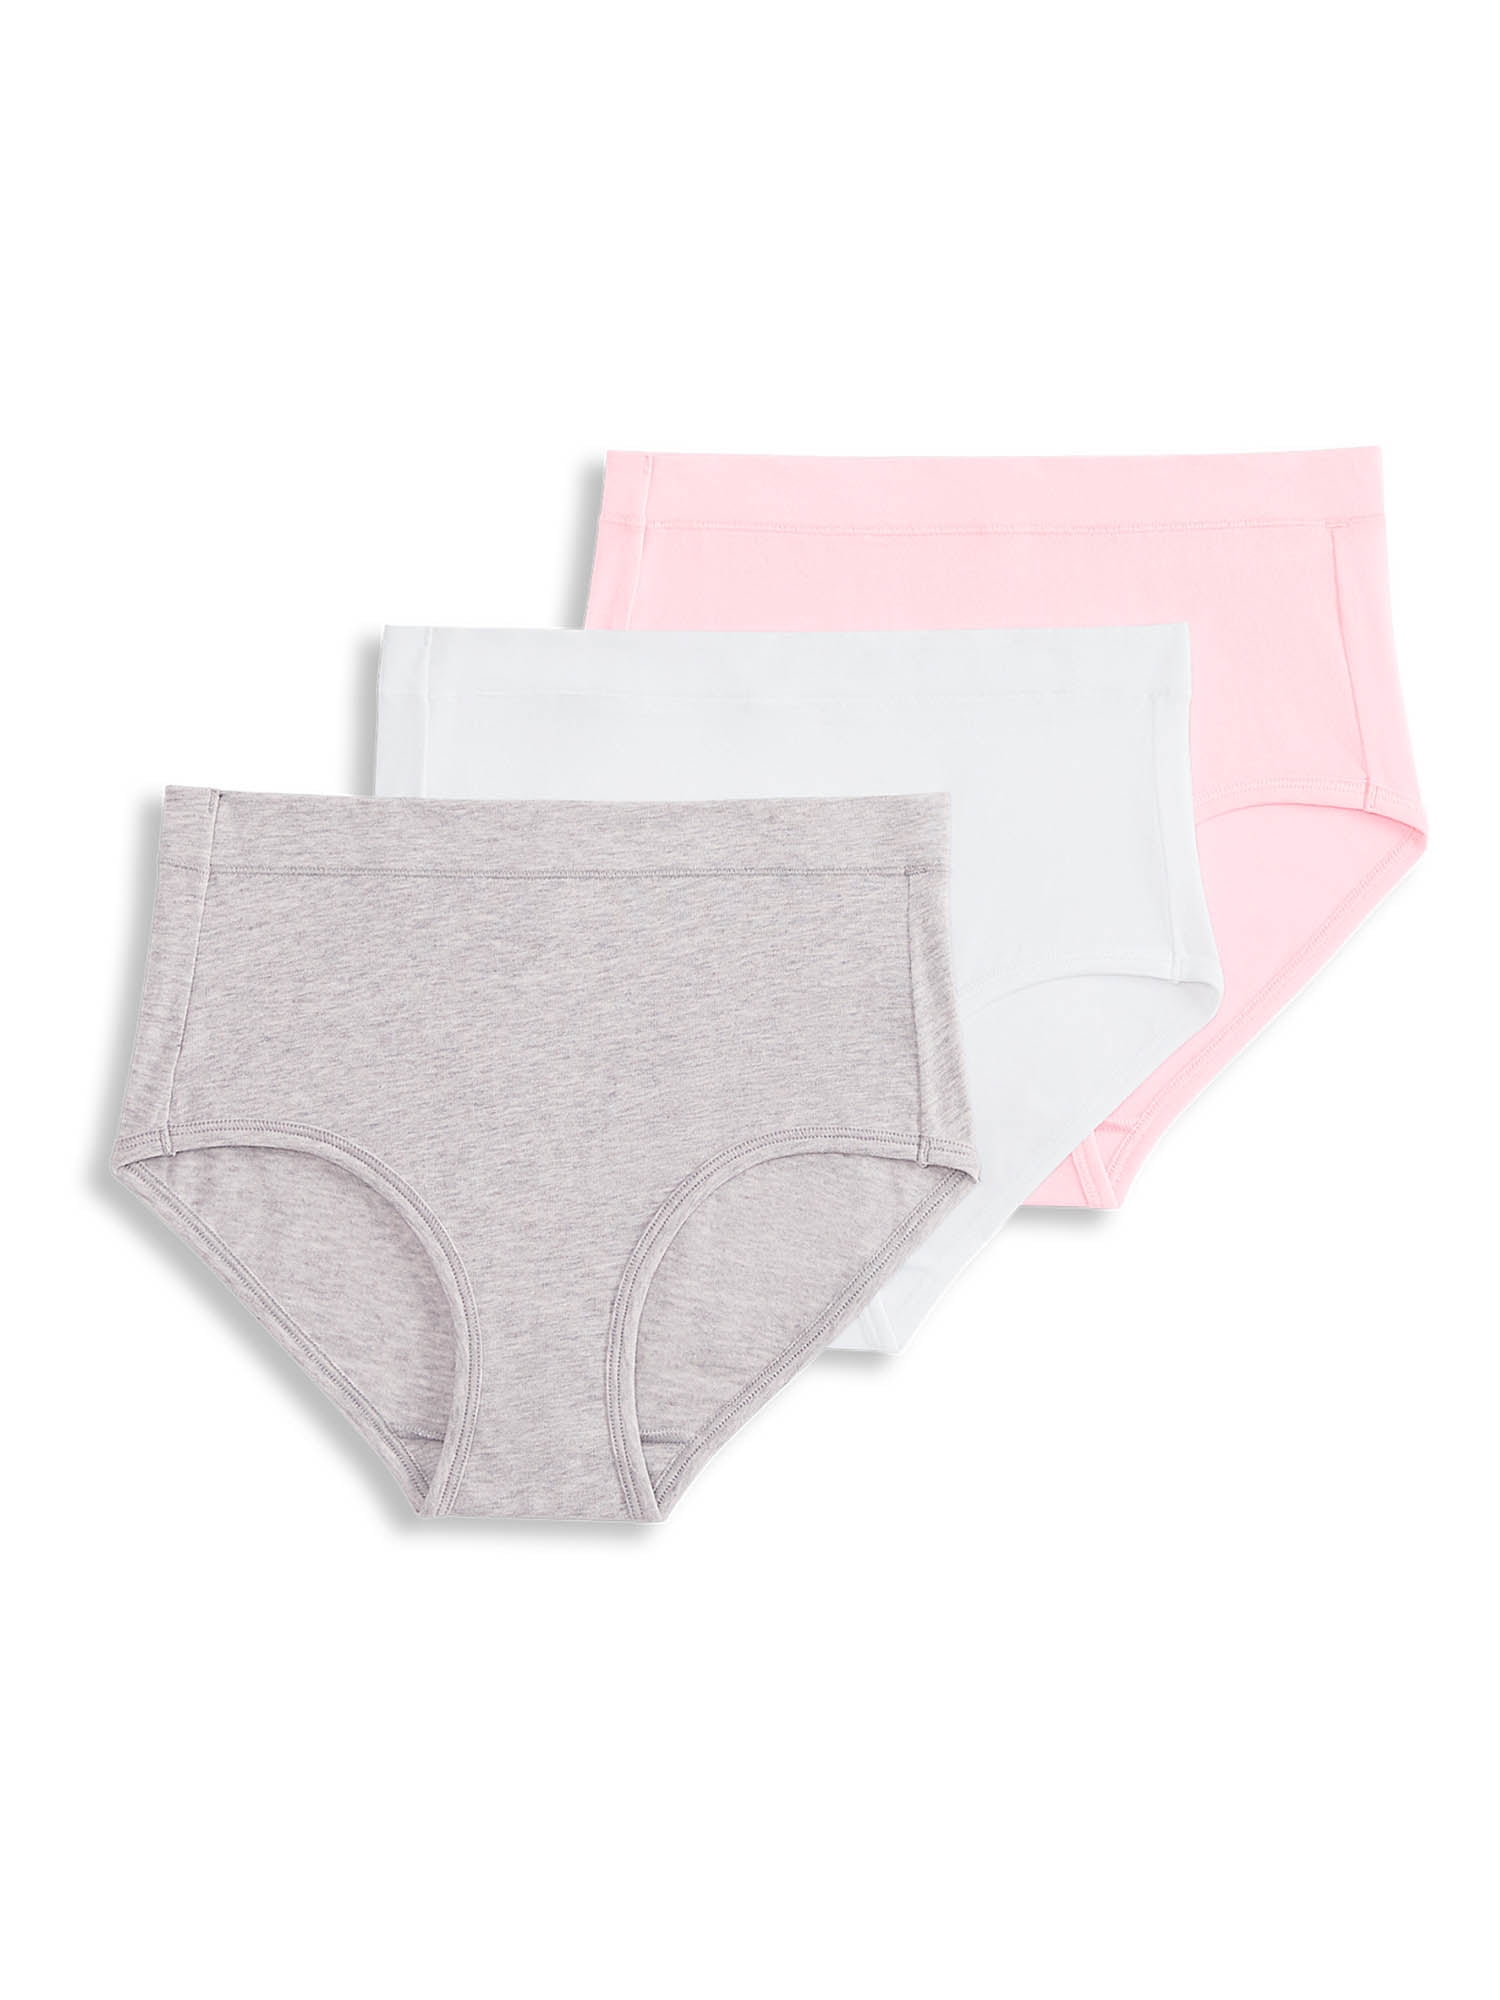 Briefs 3 Pack Jockey Women's Cotton Stretch Hipster Gym Inspired Breathable 